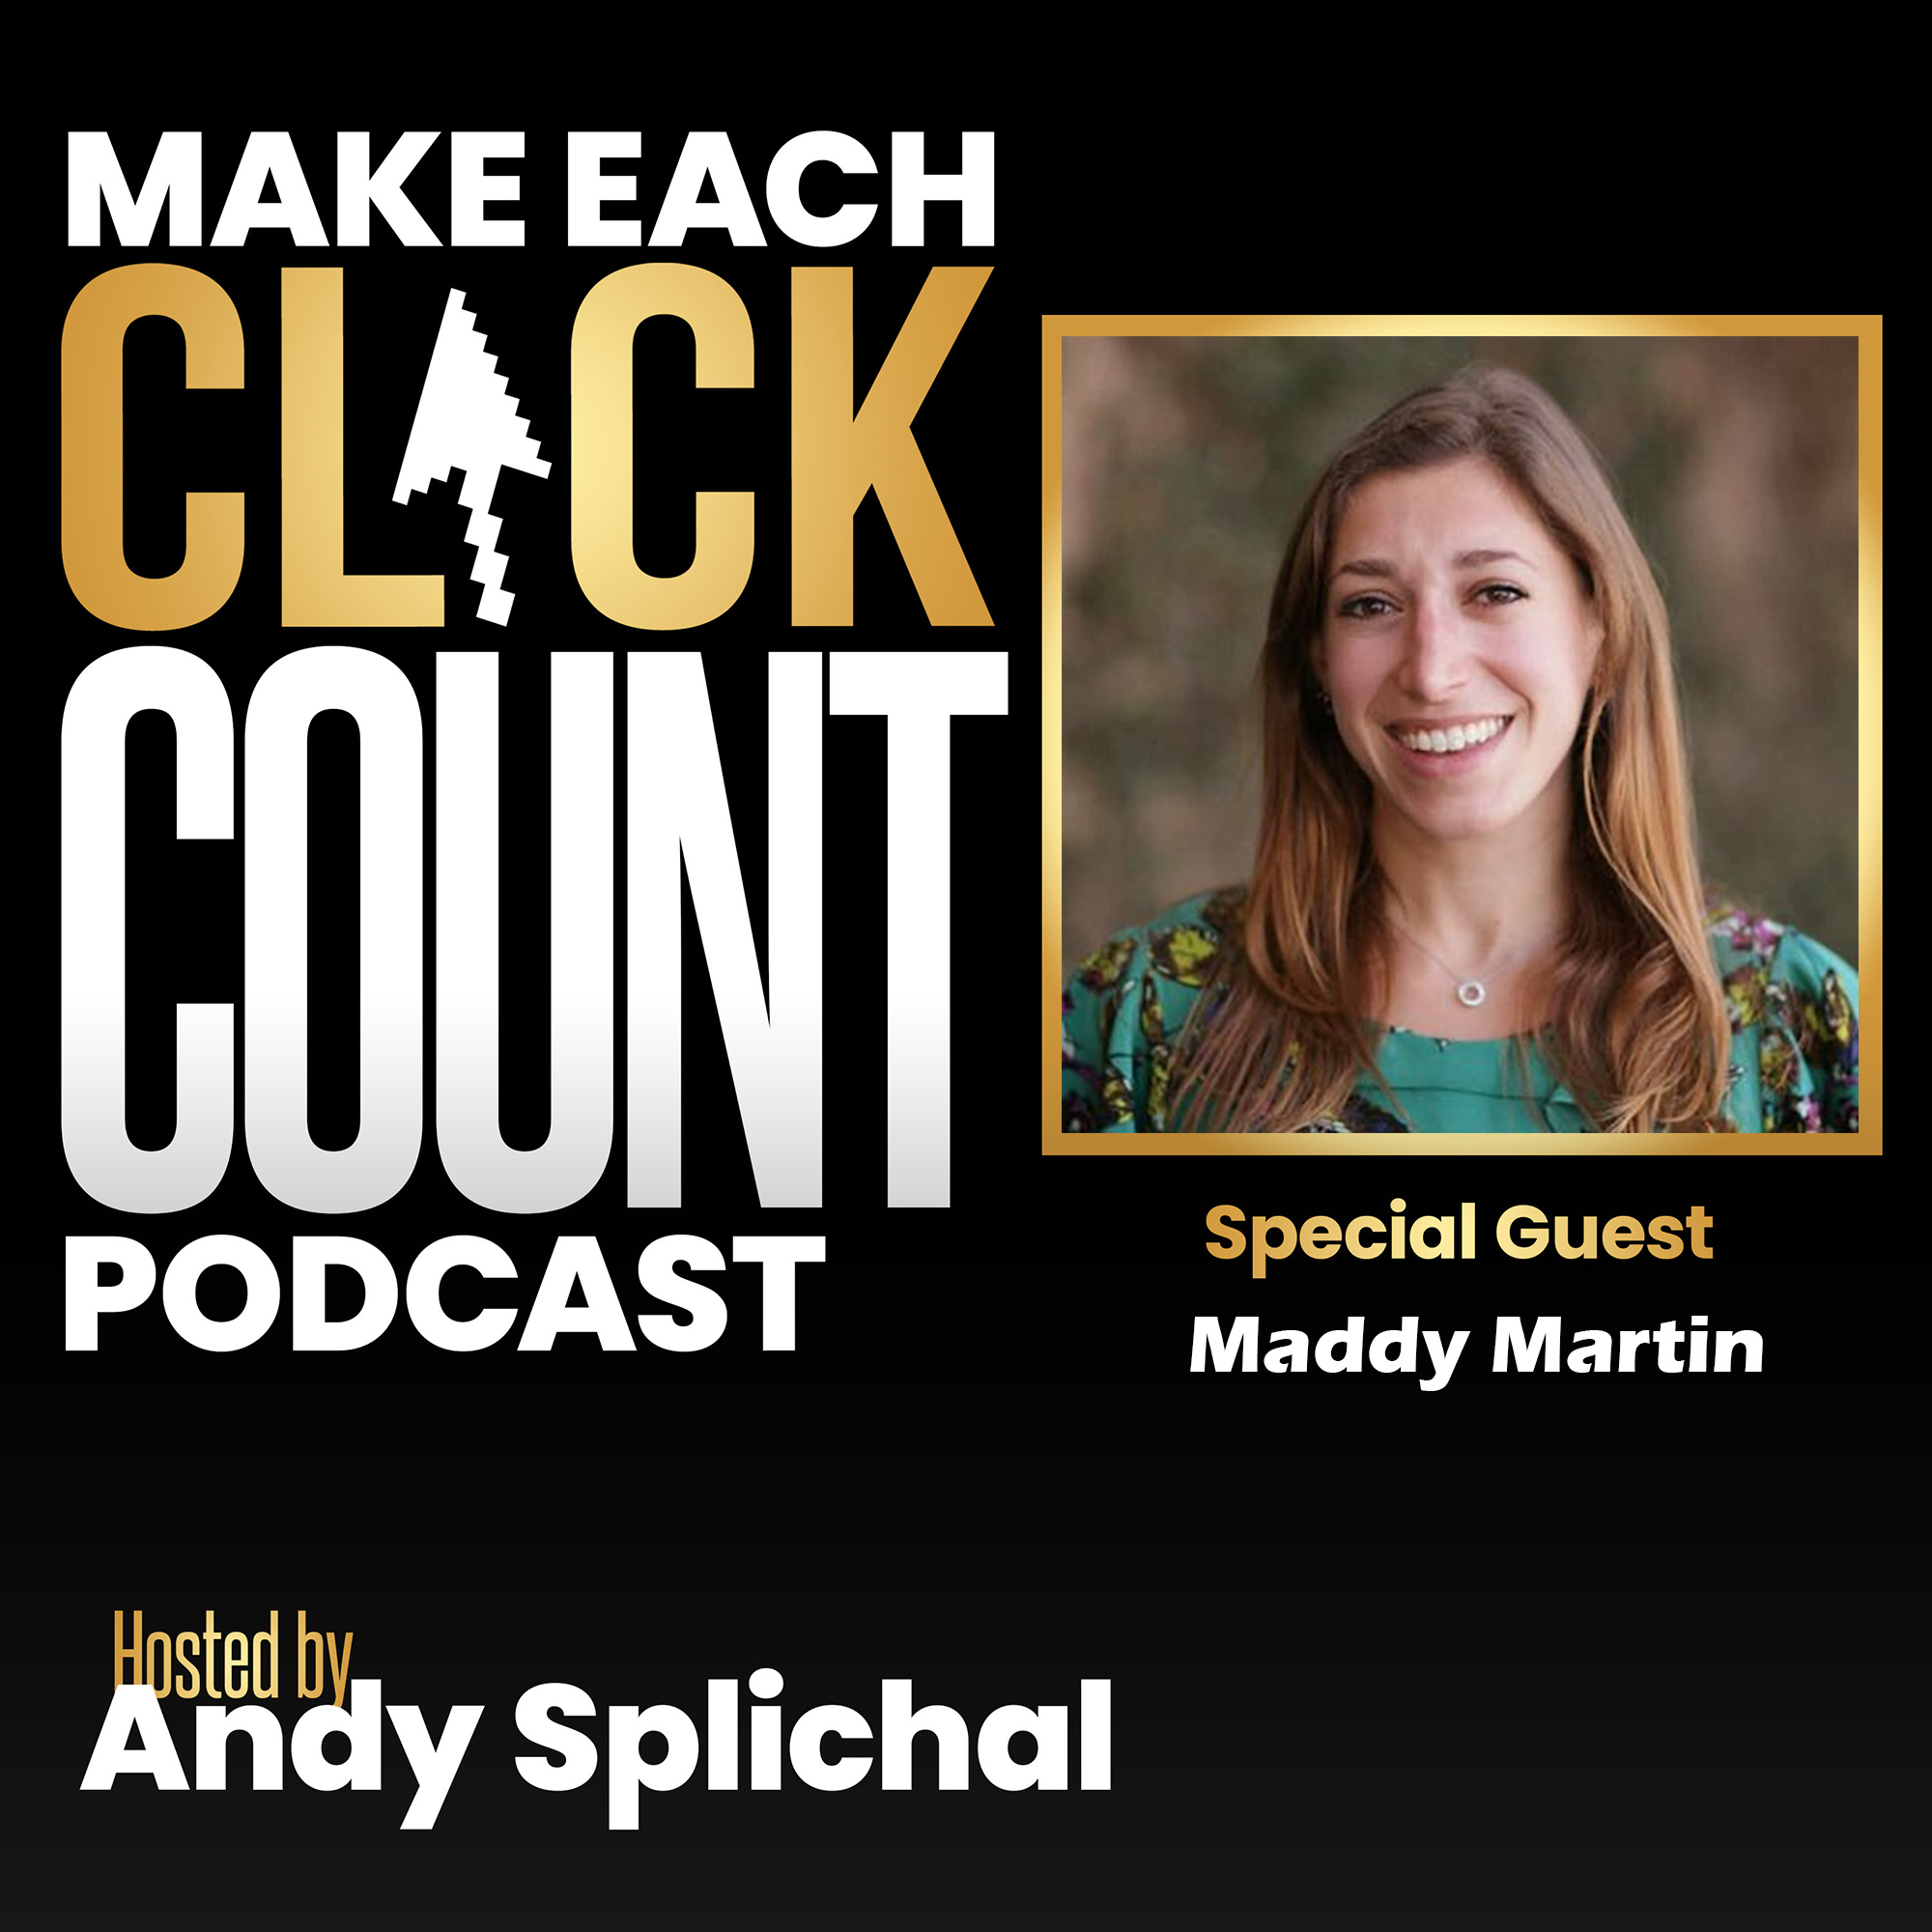 Artwork for podcast Make Each Click Count Hosted By Andy Splichal